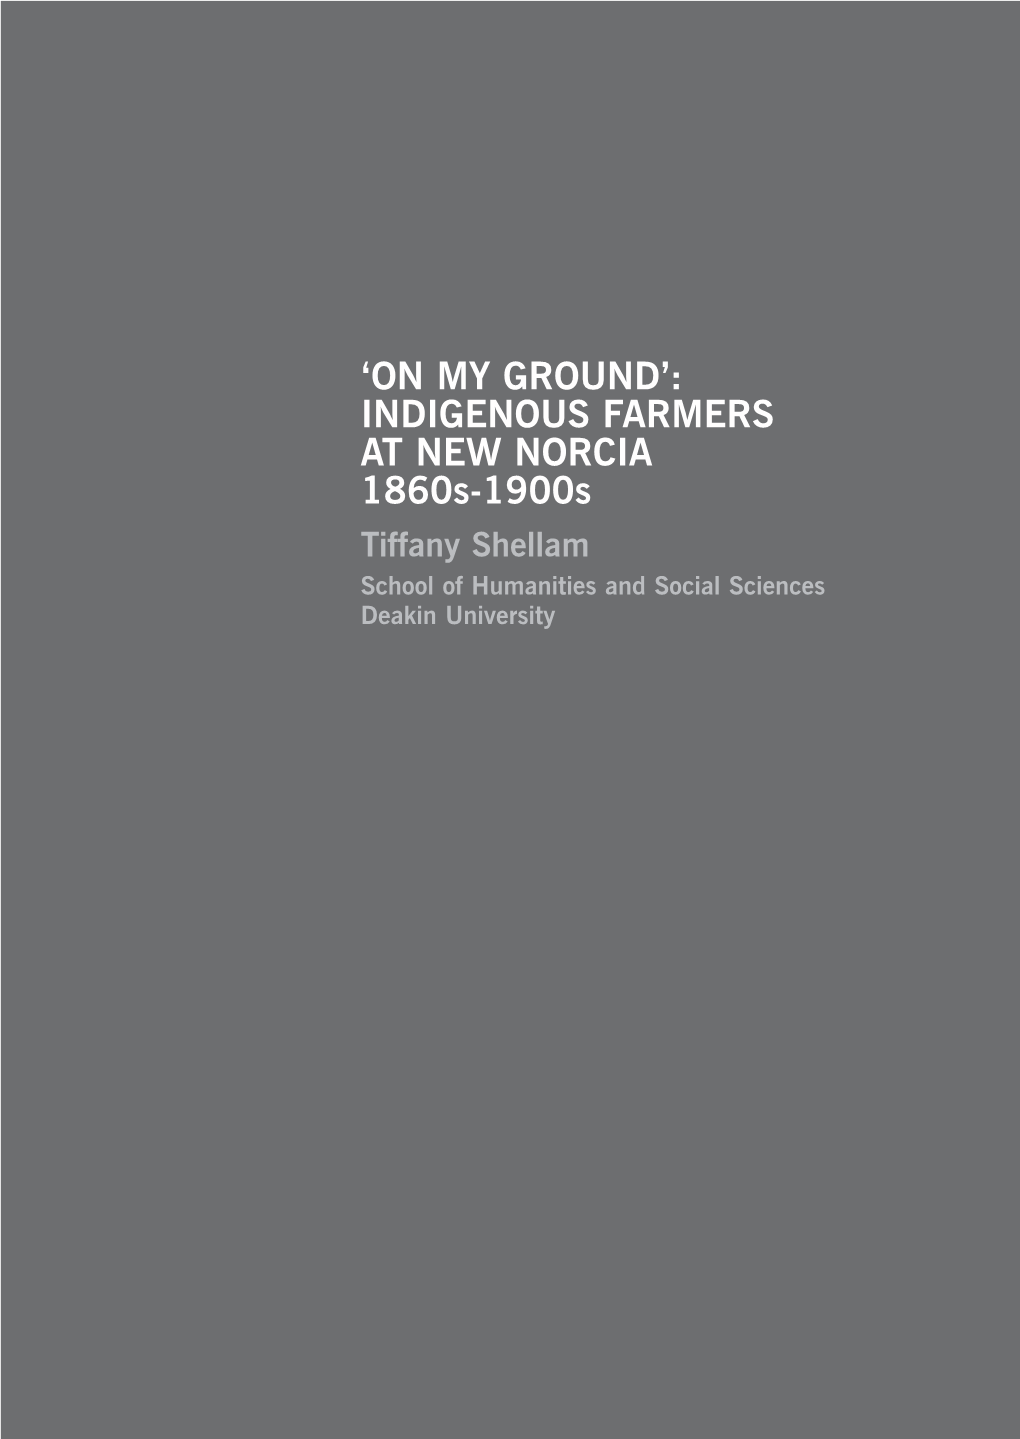 INDIGENOUS FARMERS at NEW NORCIA 1860S-1900S Tiffany Shellam School of Humanities and Social Sciences Deakin University